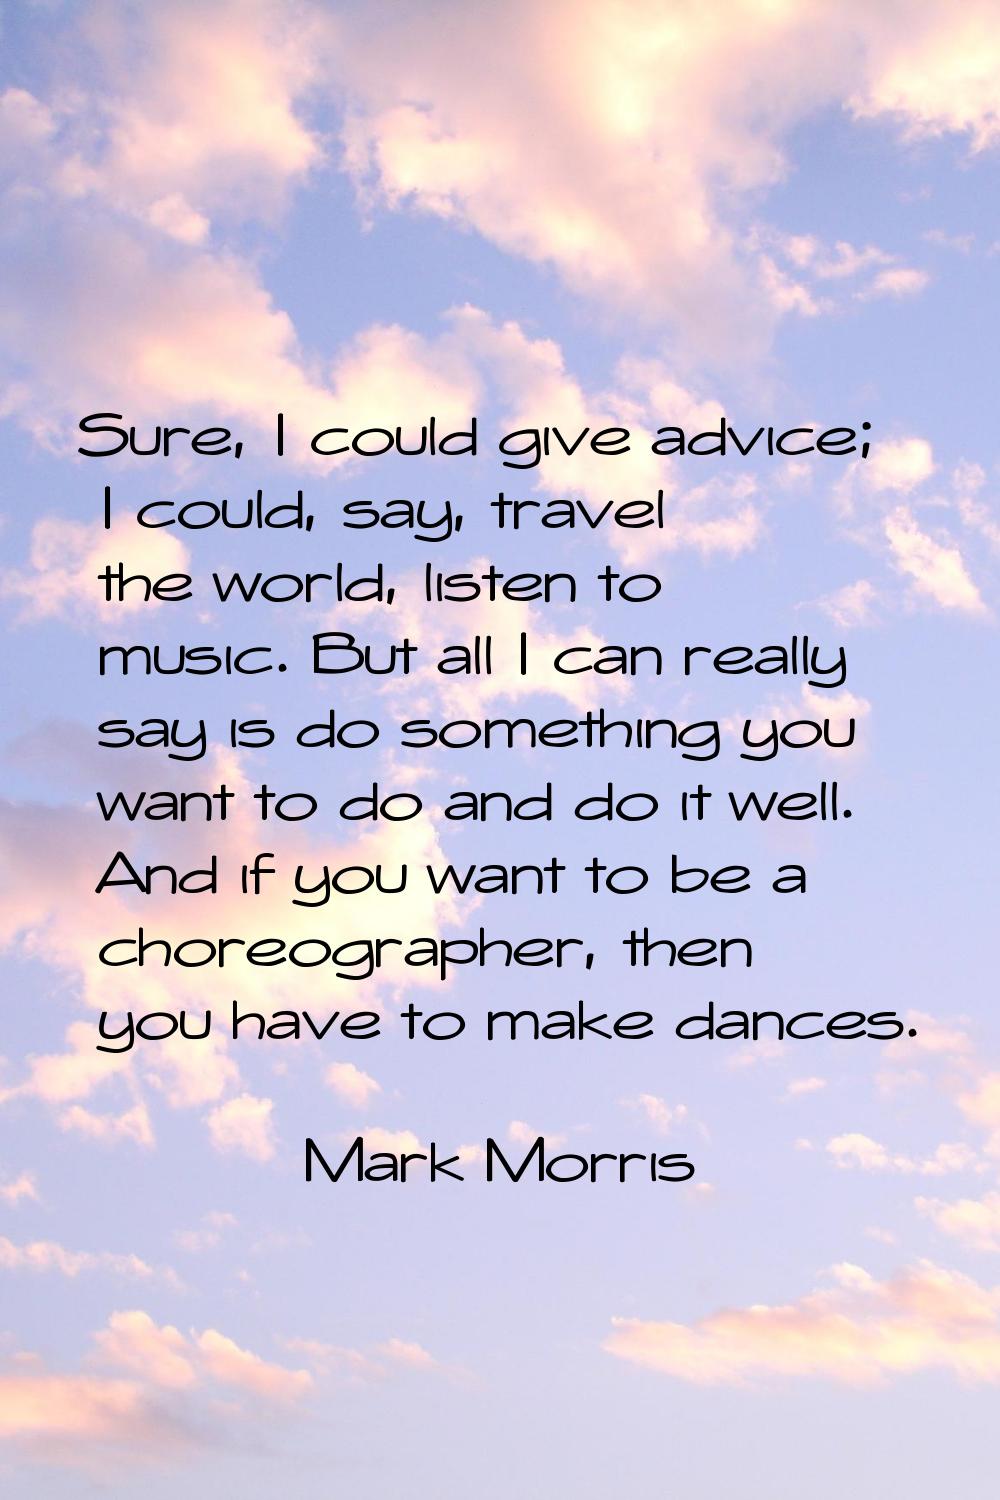 Sure, I could give advice; I could, say, travel the world, listen to music. But all I can really sa